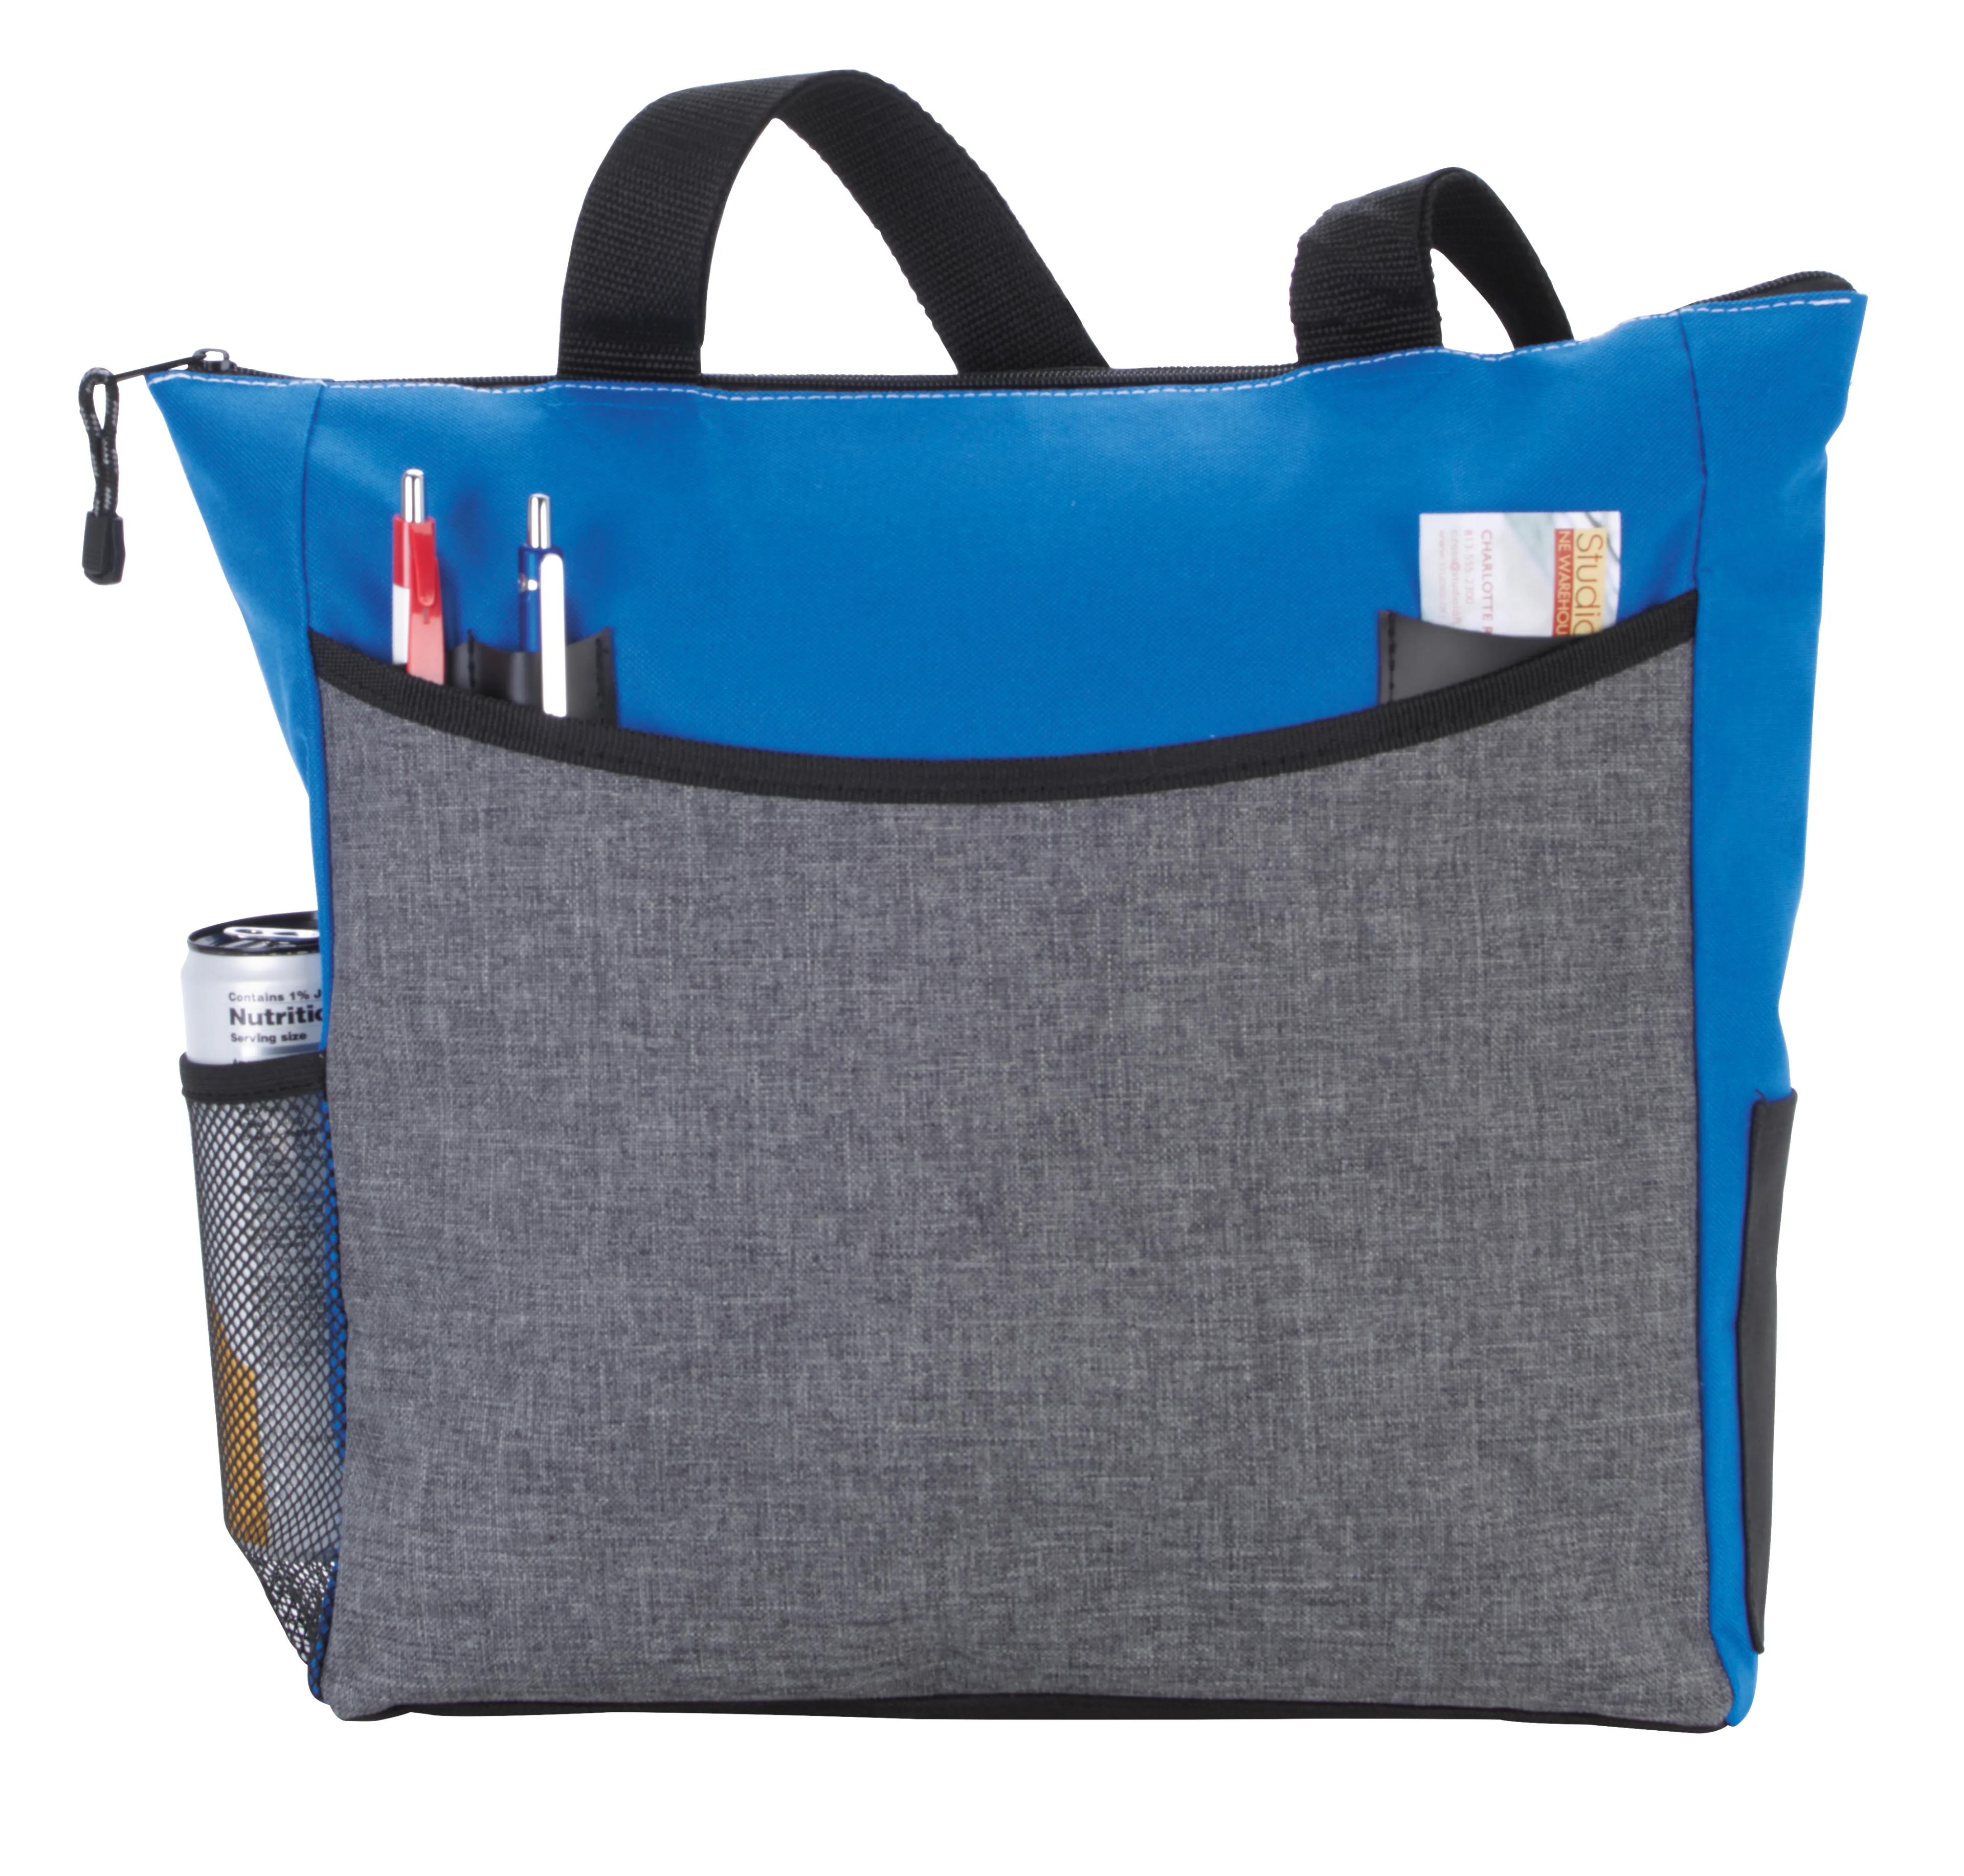 Two-Tone TranSport It Tote 22 of 29